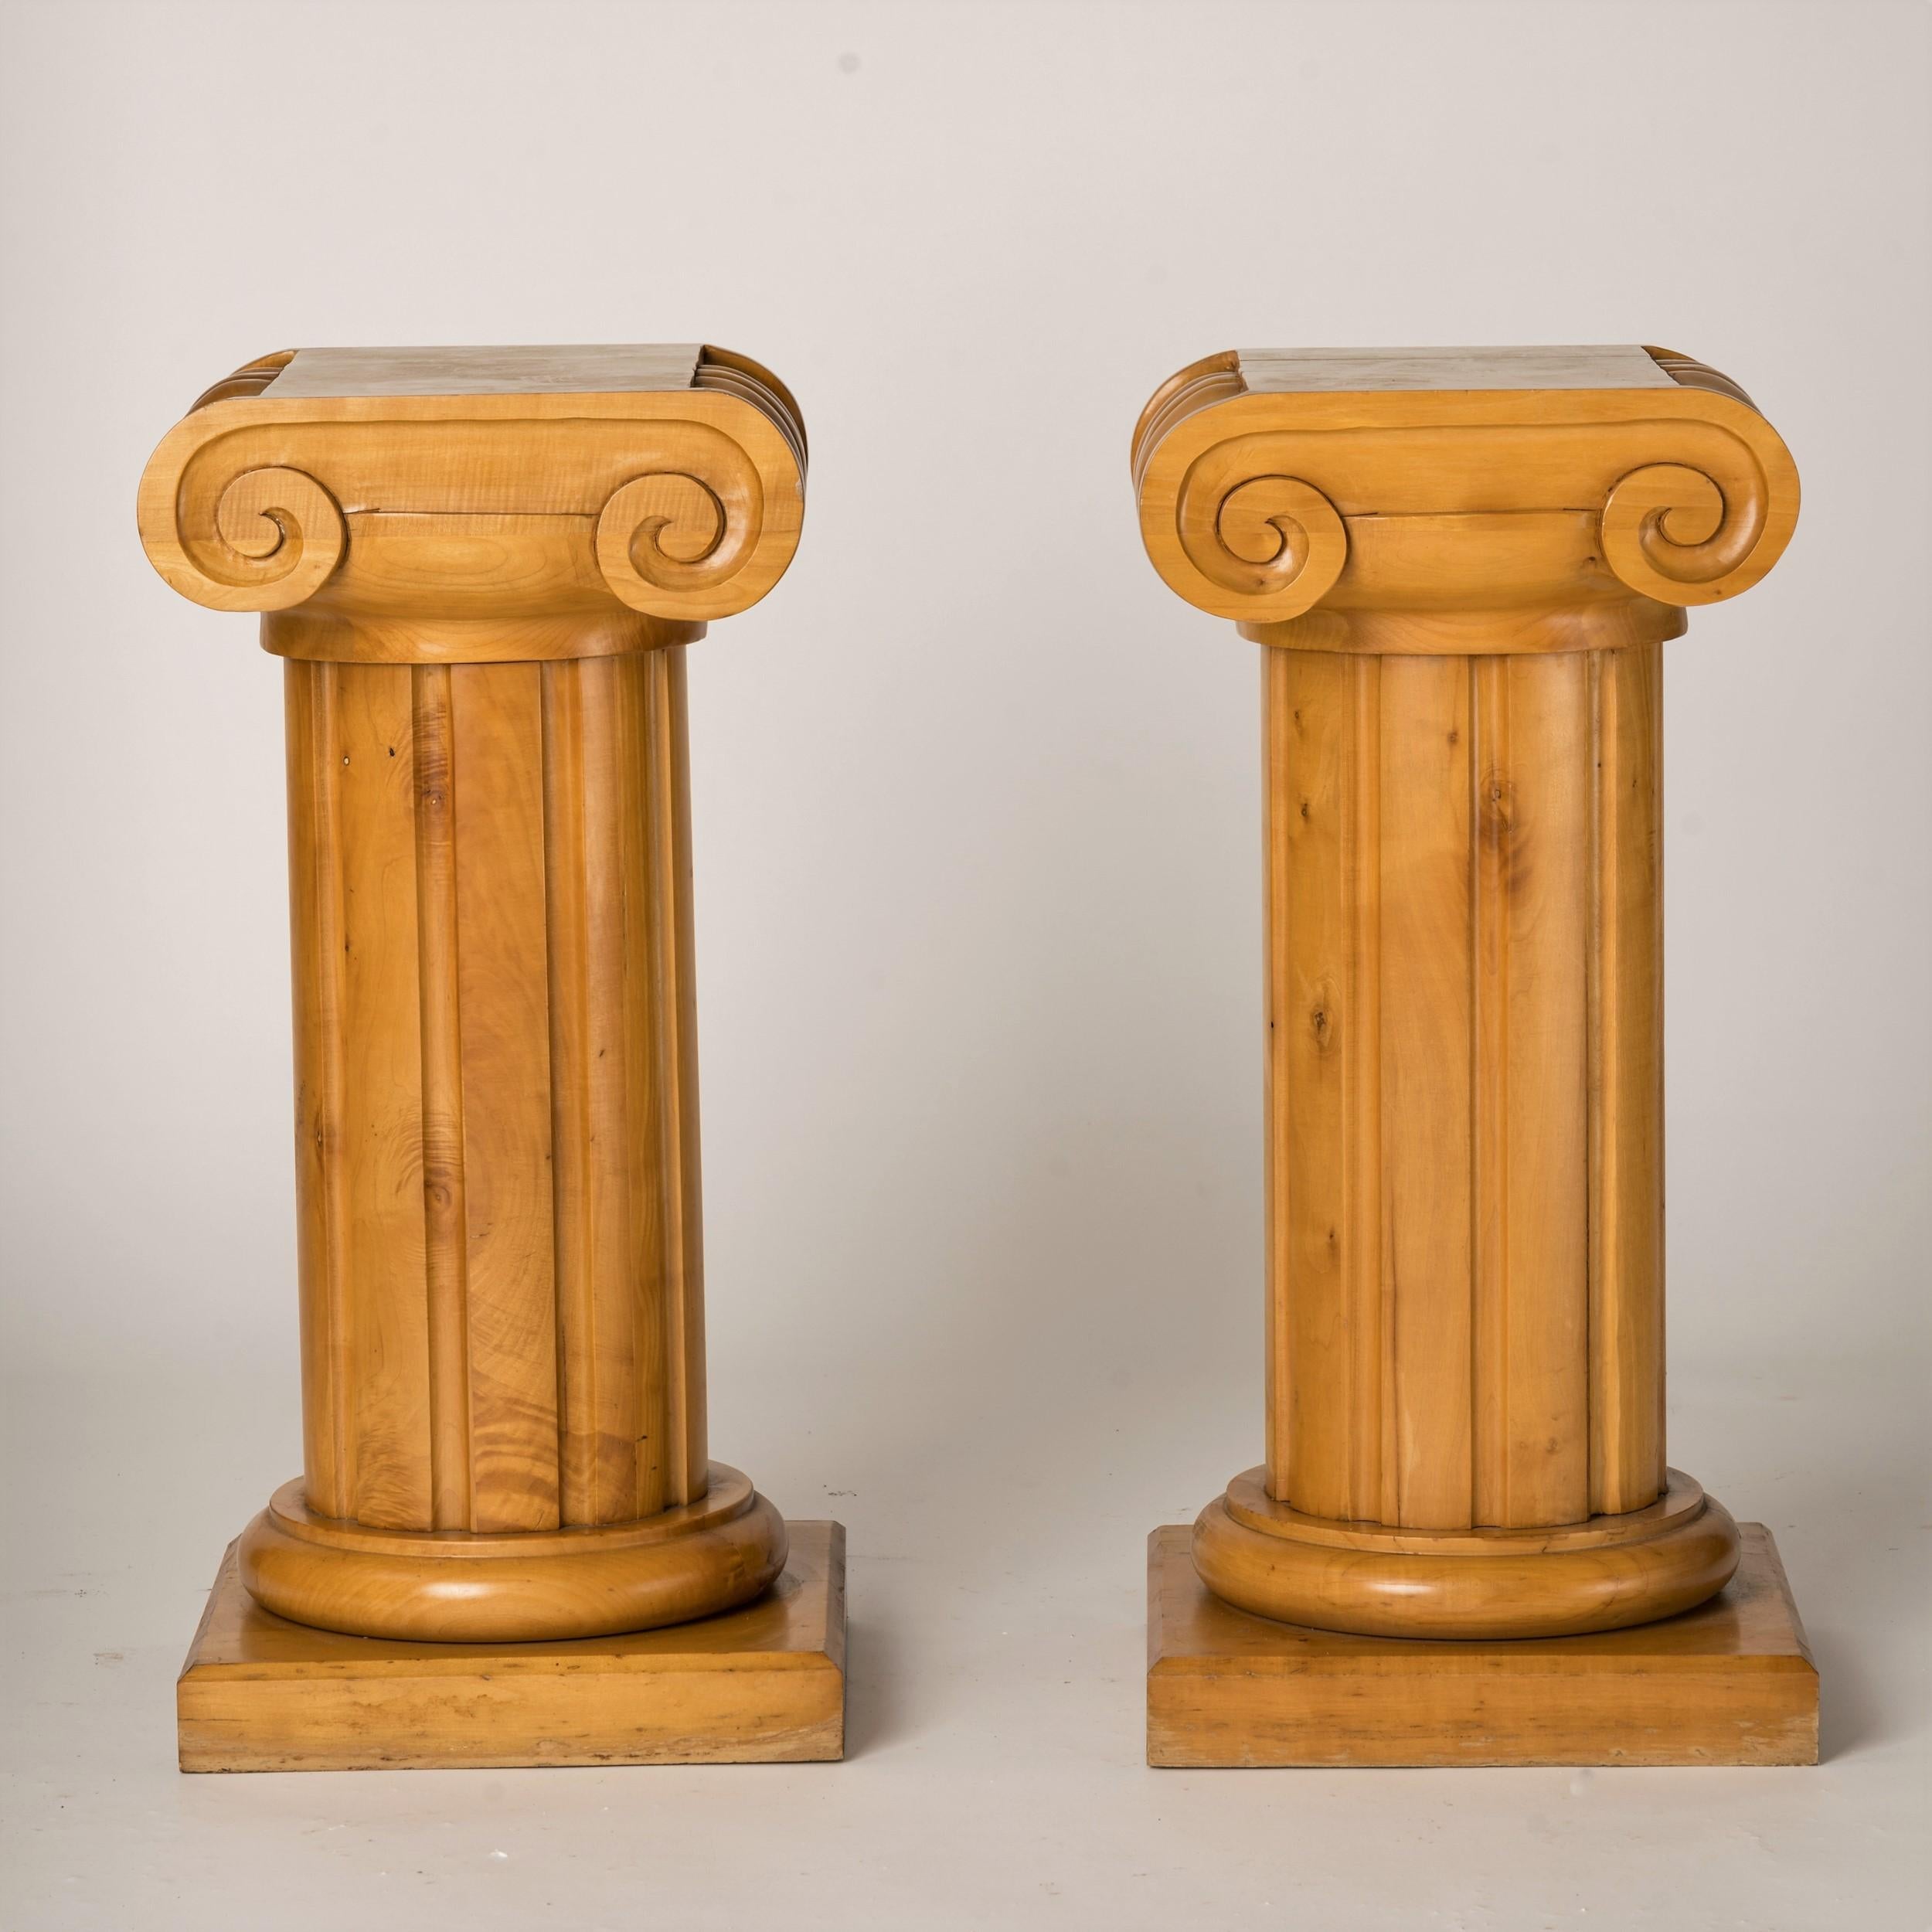 Unique pair of graphic solid wood pedestals of gueridons. Extremely heavy. Could be used either as pedestals or as gueridons or bouts de canapés. In good vintage condition. Some varnish losses and minor structural damages as shown on